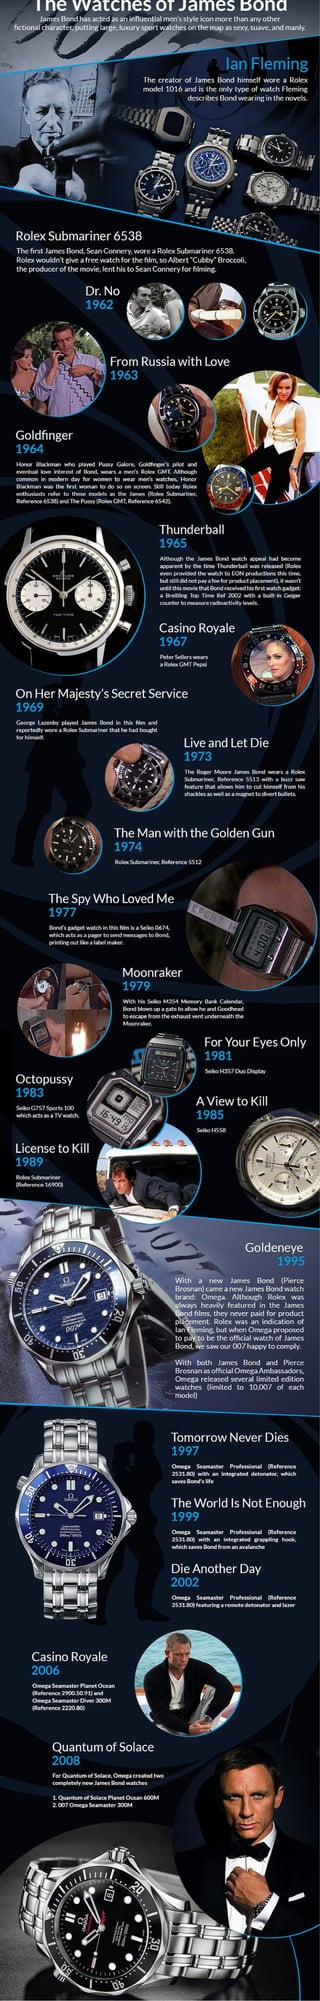 The Watches of James Bond Infographic